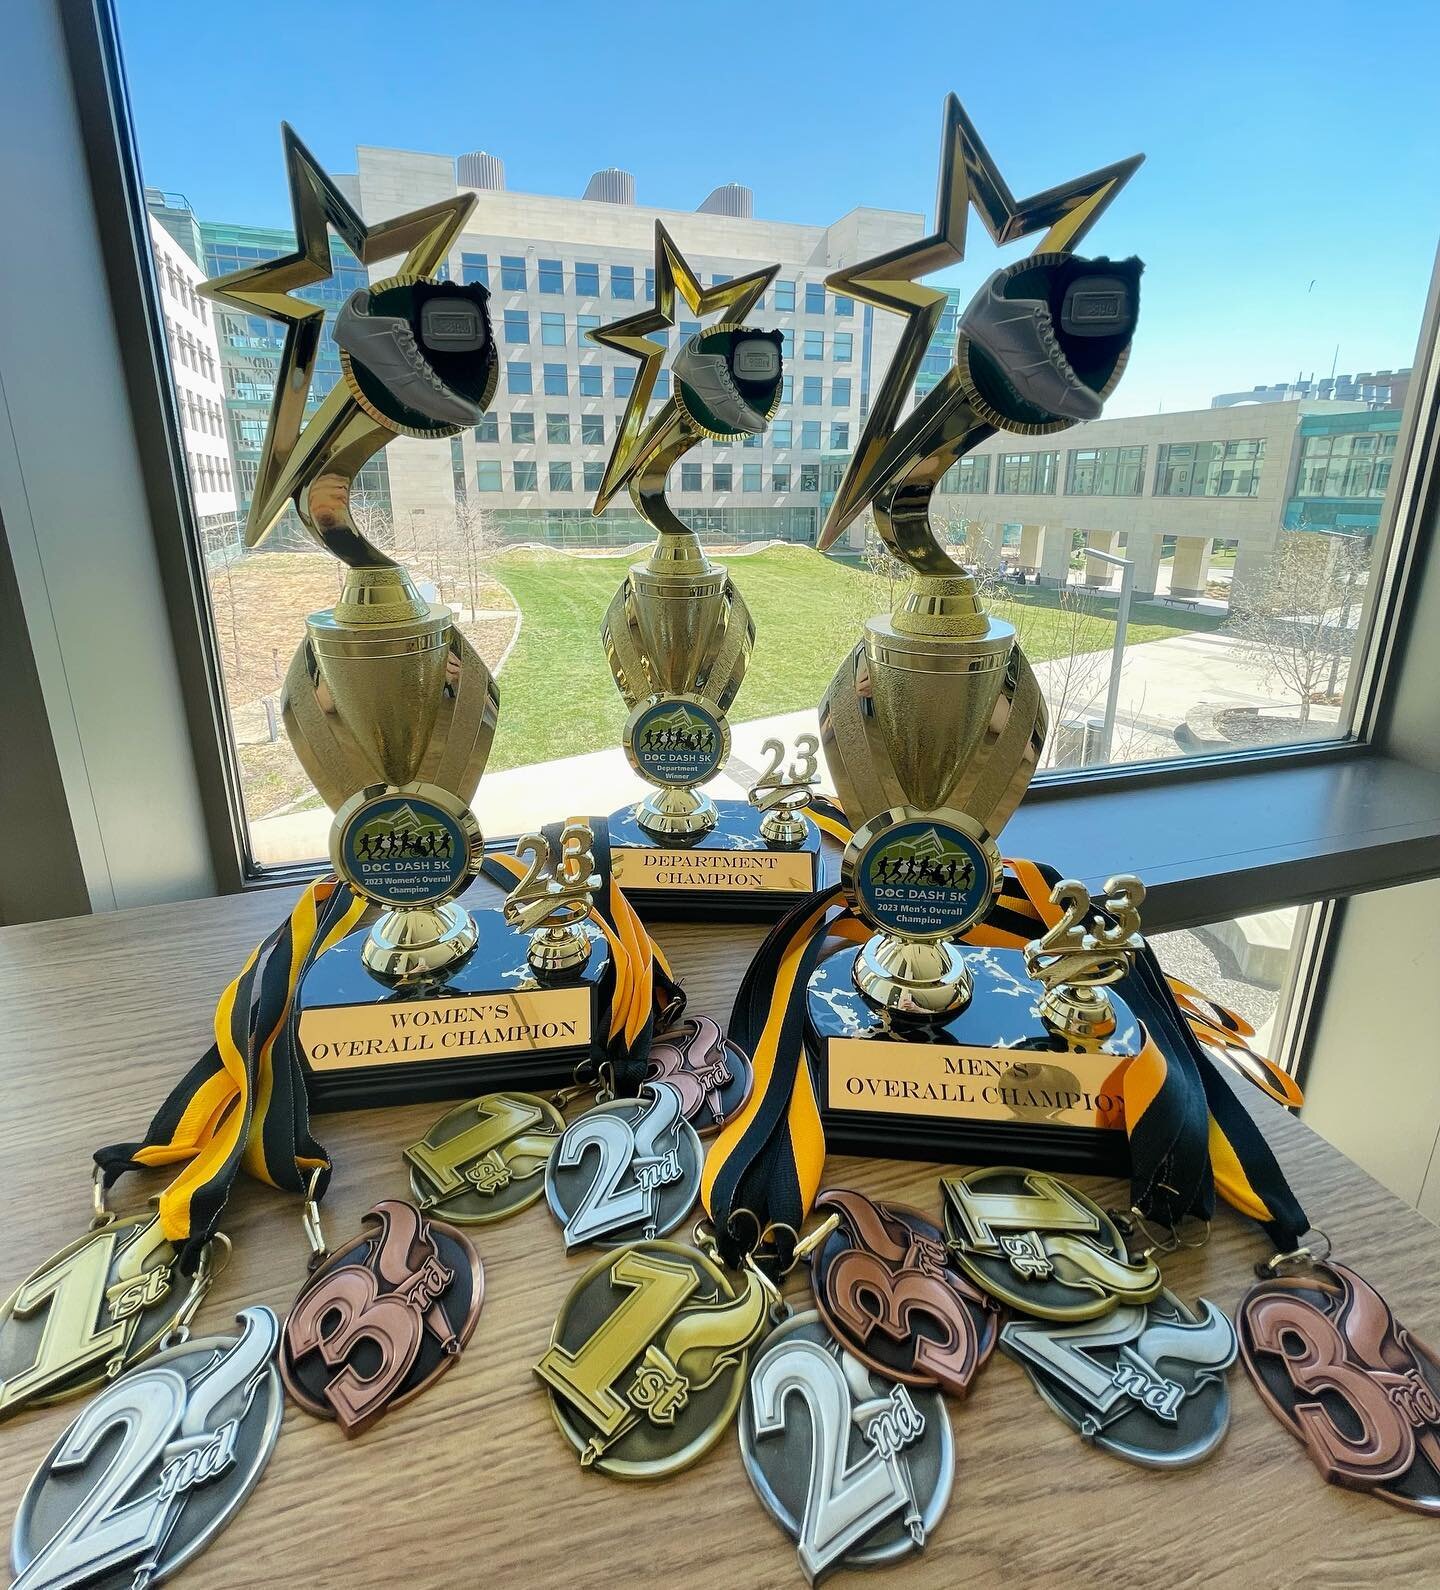 Doc Dash is 3 days away!! There is still time to sign up and have a chance to add some hardware to your collection! 🏆🥇